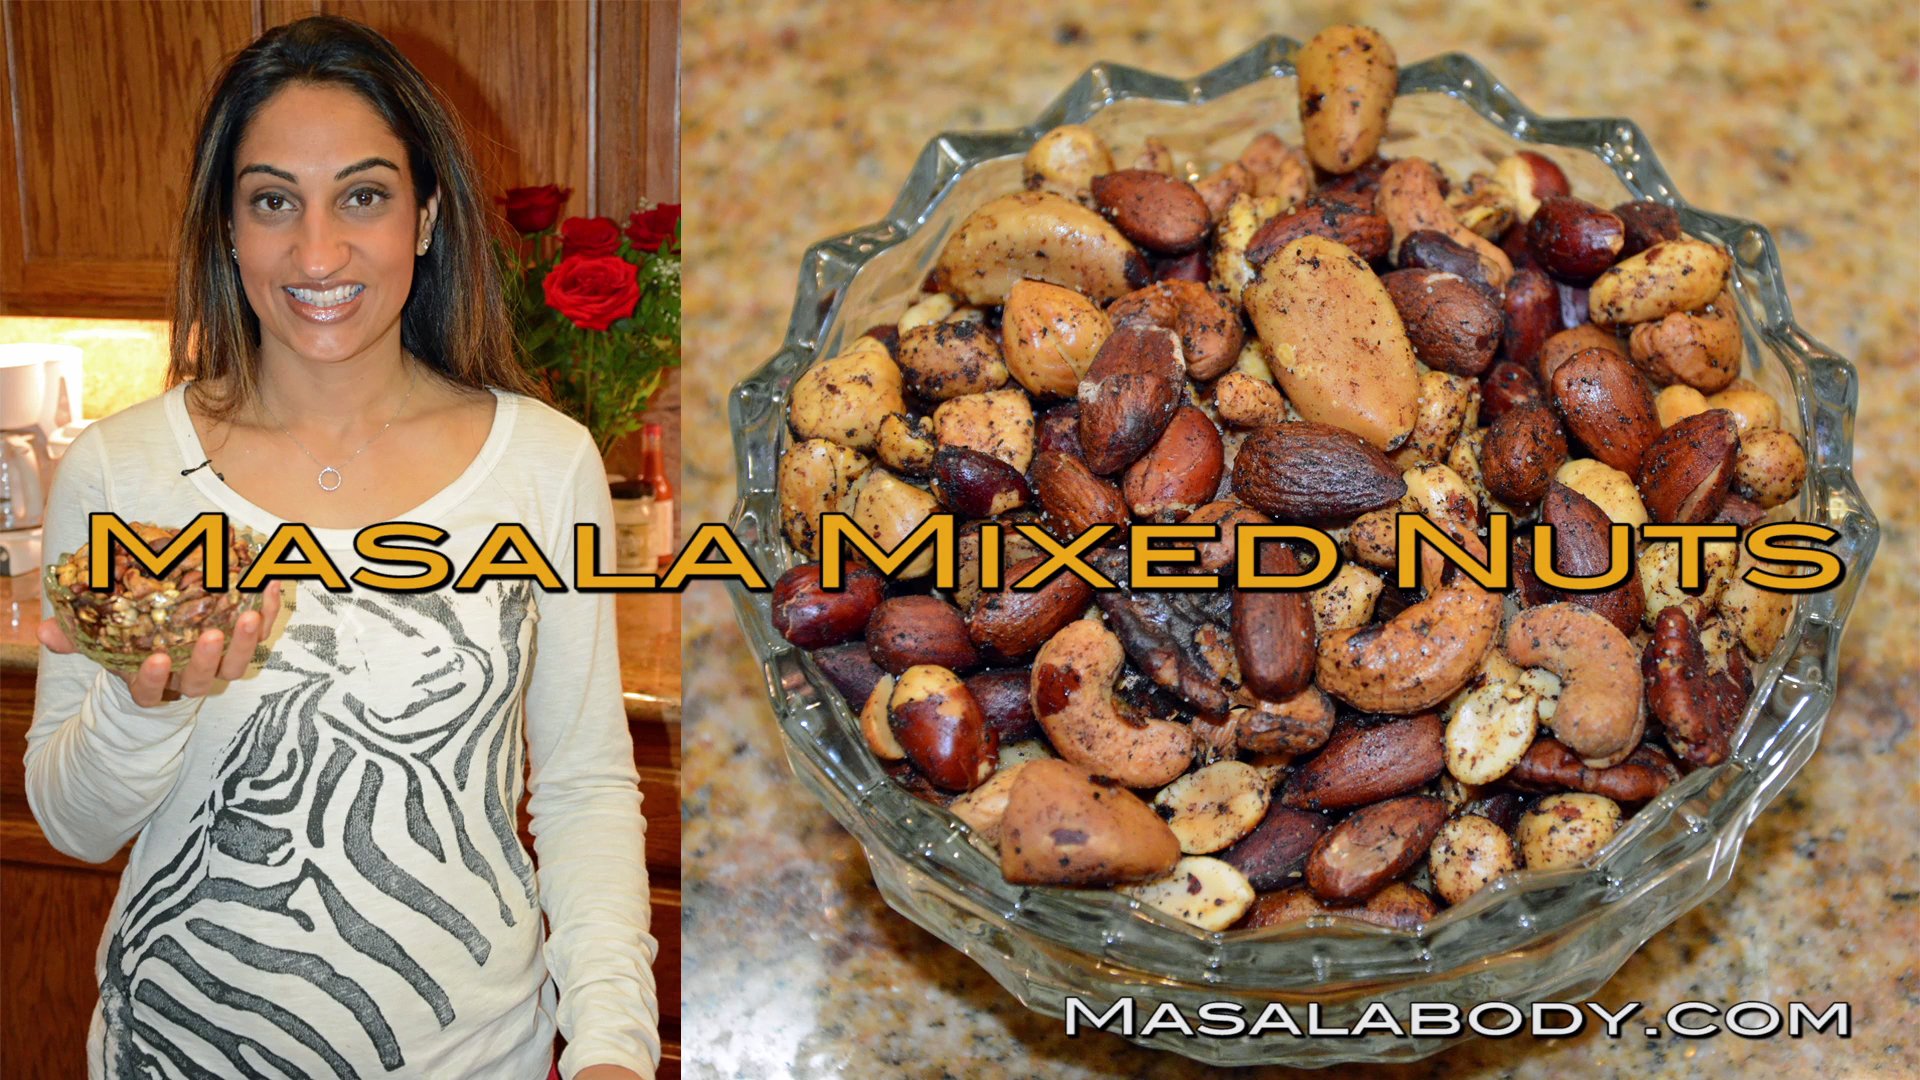 MIXED NUTS TITLE